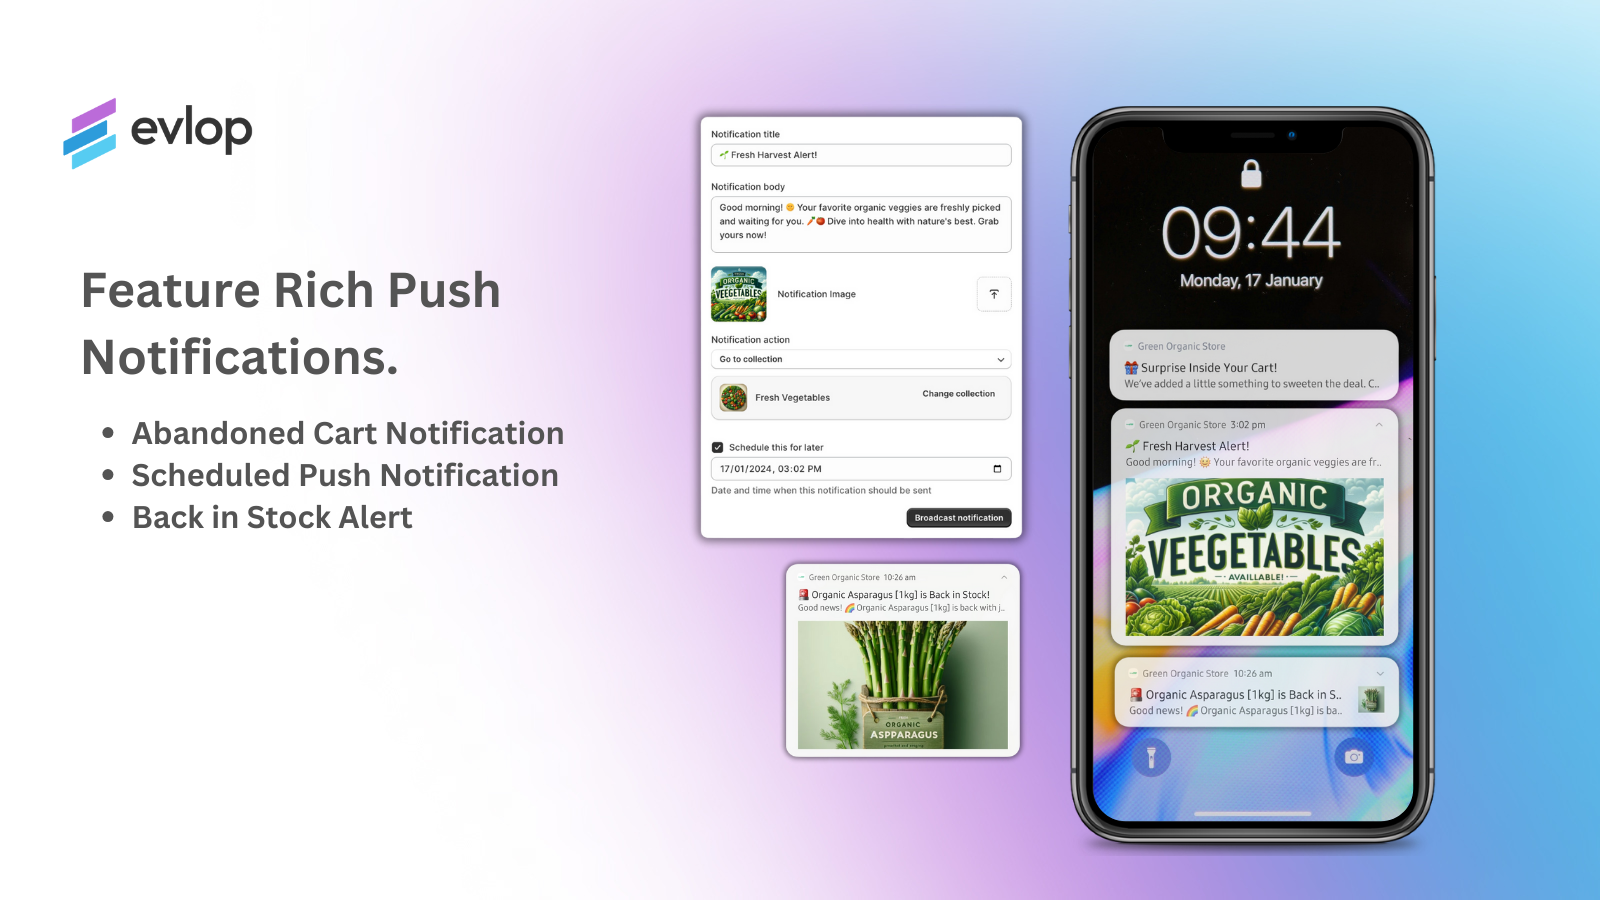 Feature Rich Push Notifications